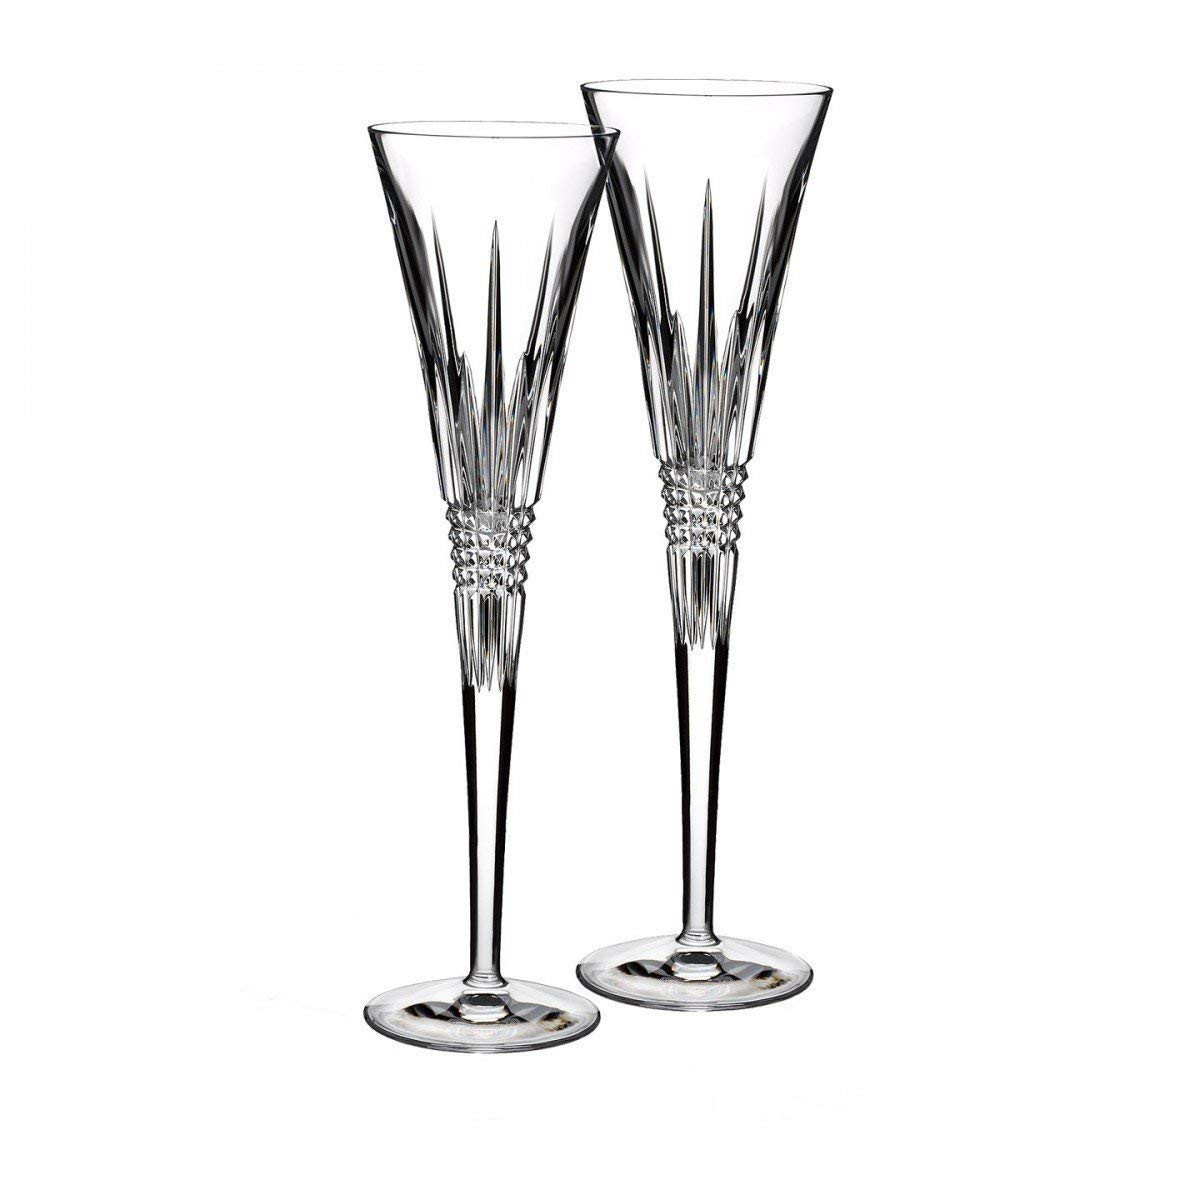 10 Fabulous Waterford Lismore Vase 8 2024 free download waterford lismore vase 8 of amazon com lismore diamond toasting flute glass set of 2 with regard to amazon com lismore diamond toasting flute glass set of 2 champagne flutes champagne glasse